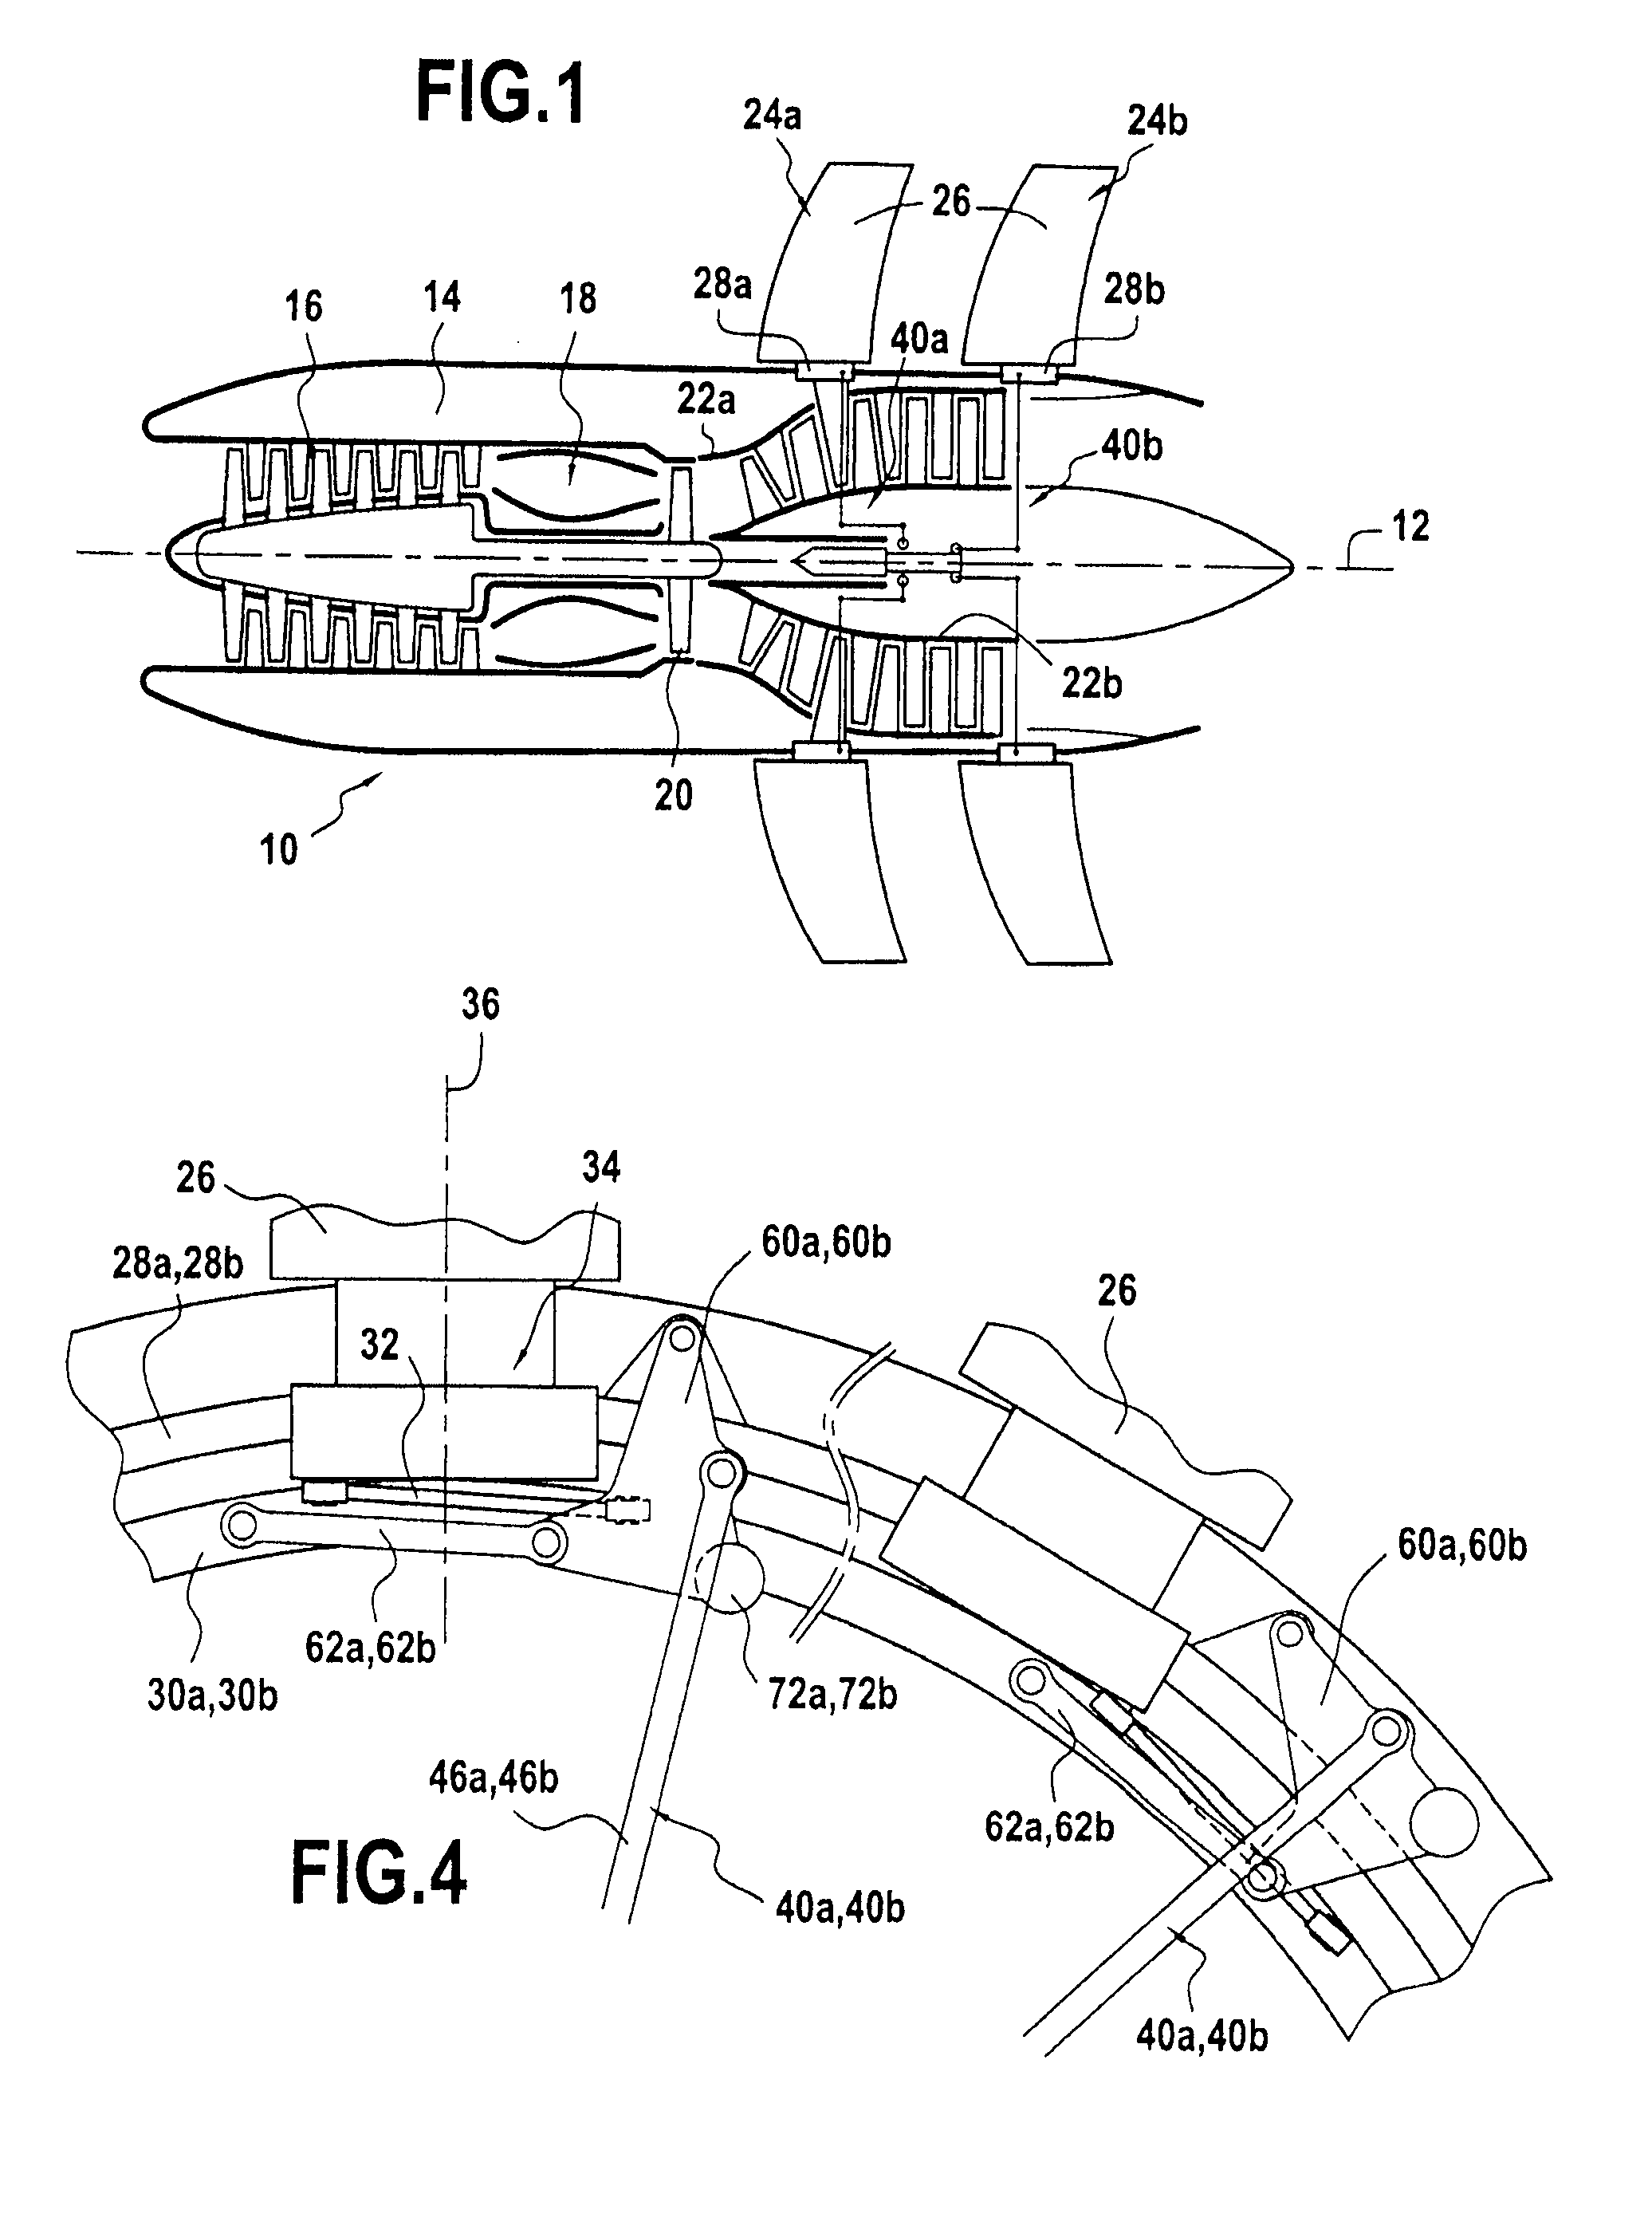 Device for controlling the pitch of fan blades of a turboprop